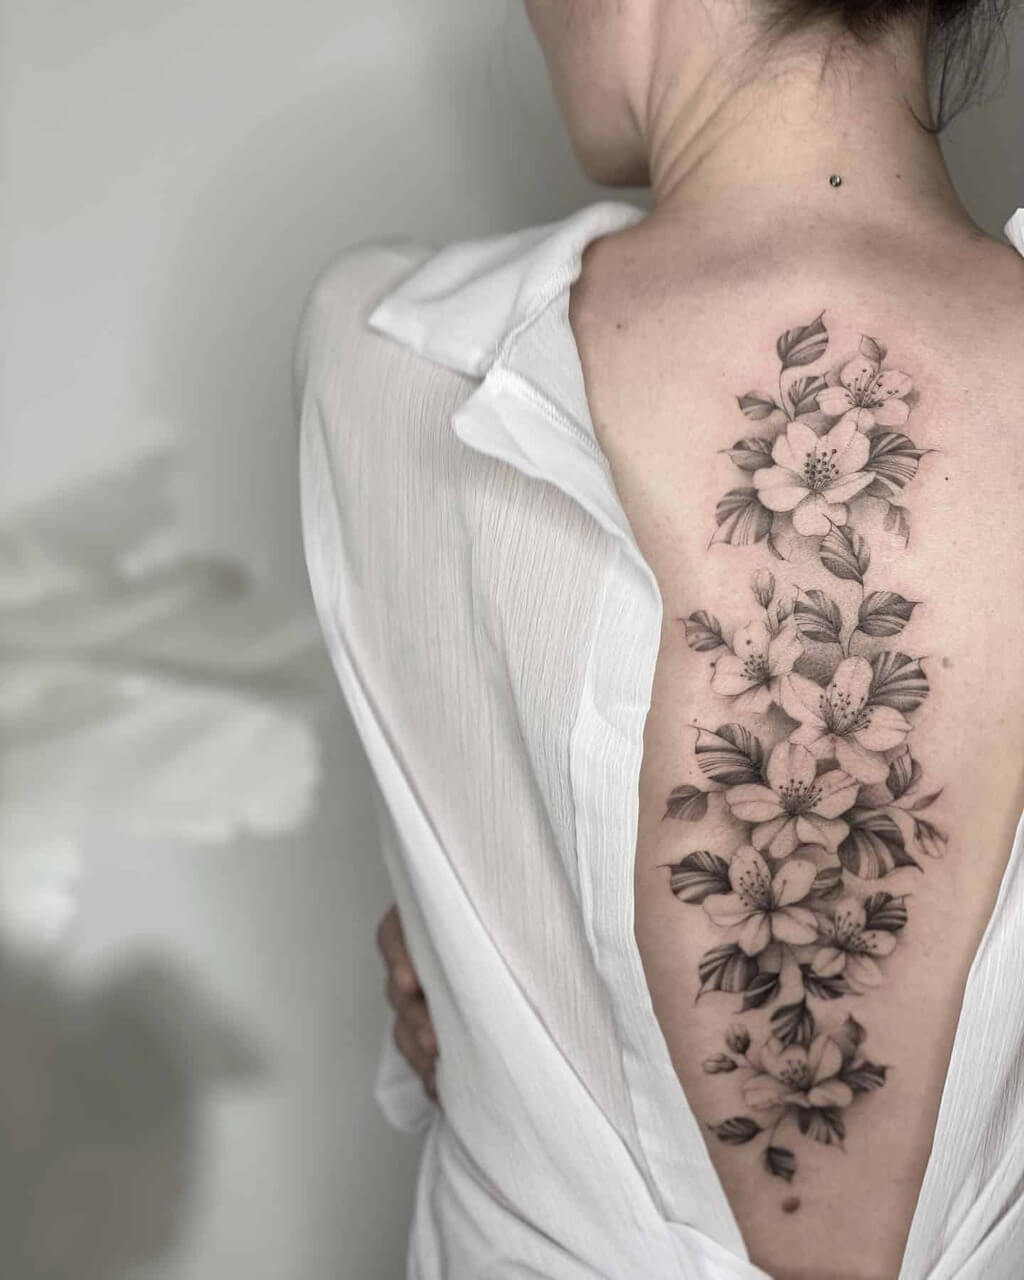 A woman with a cherry blossom tattoos  on her back